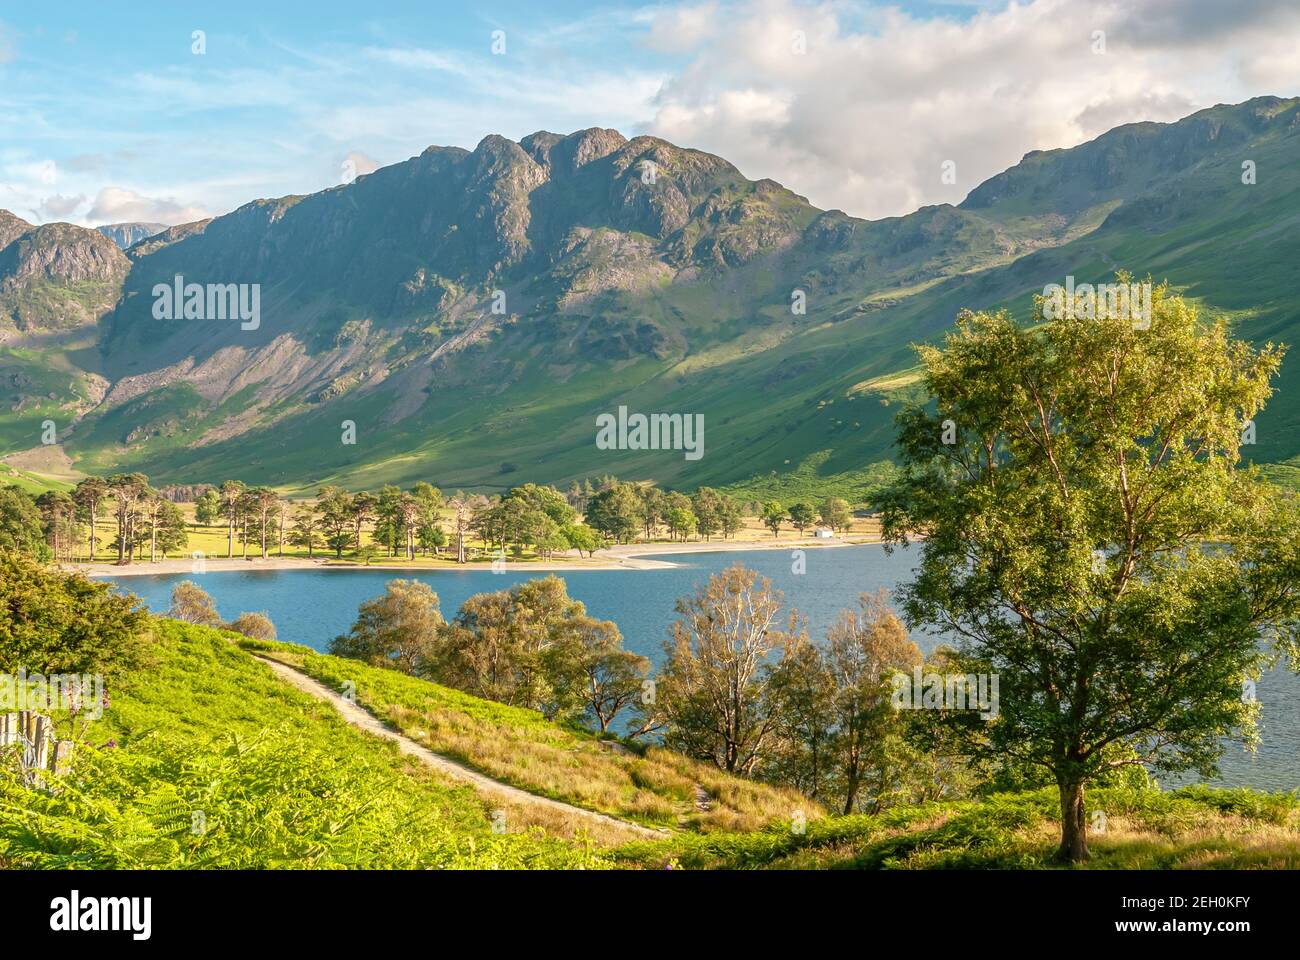 Landscape at Buttermere, a lake in the English Lake District in North West England Stock Photo